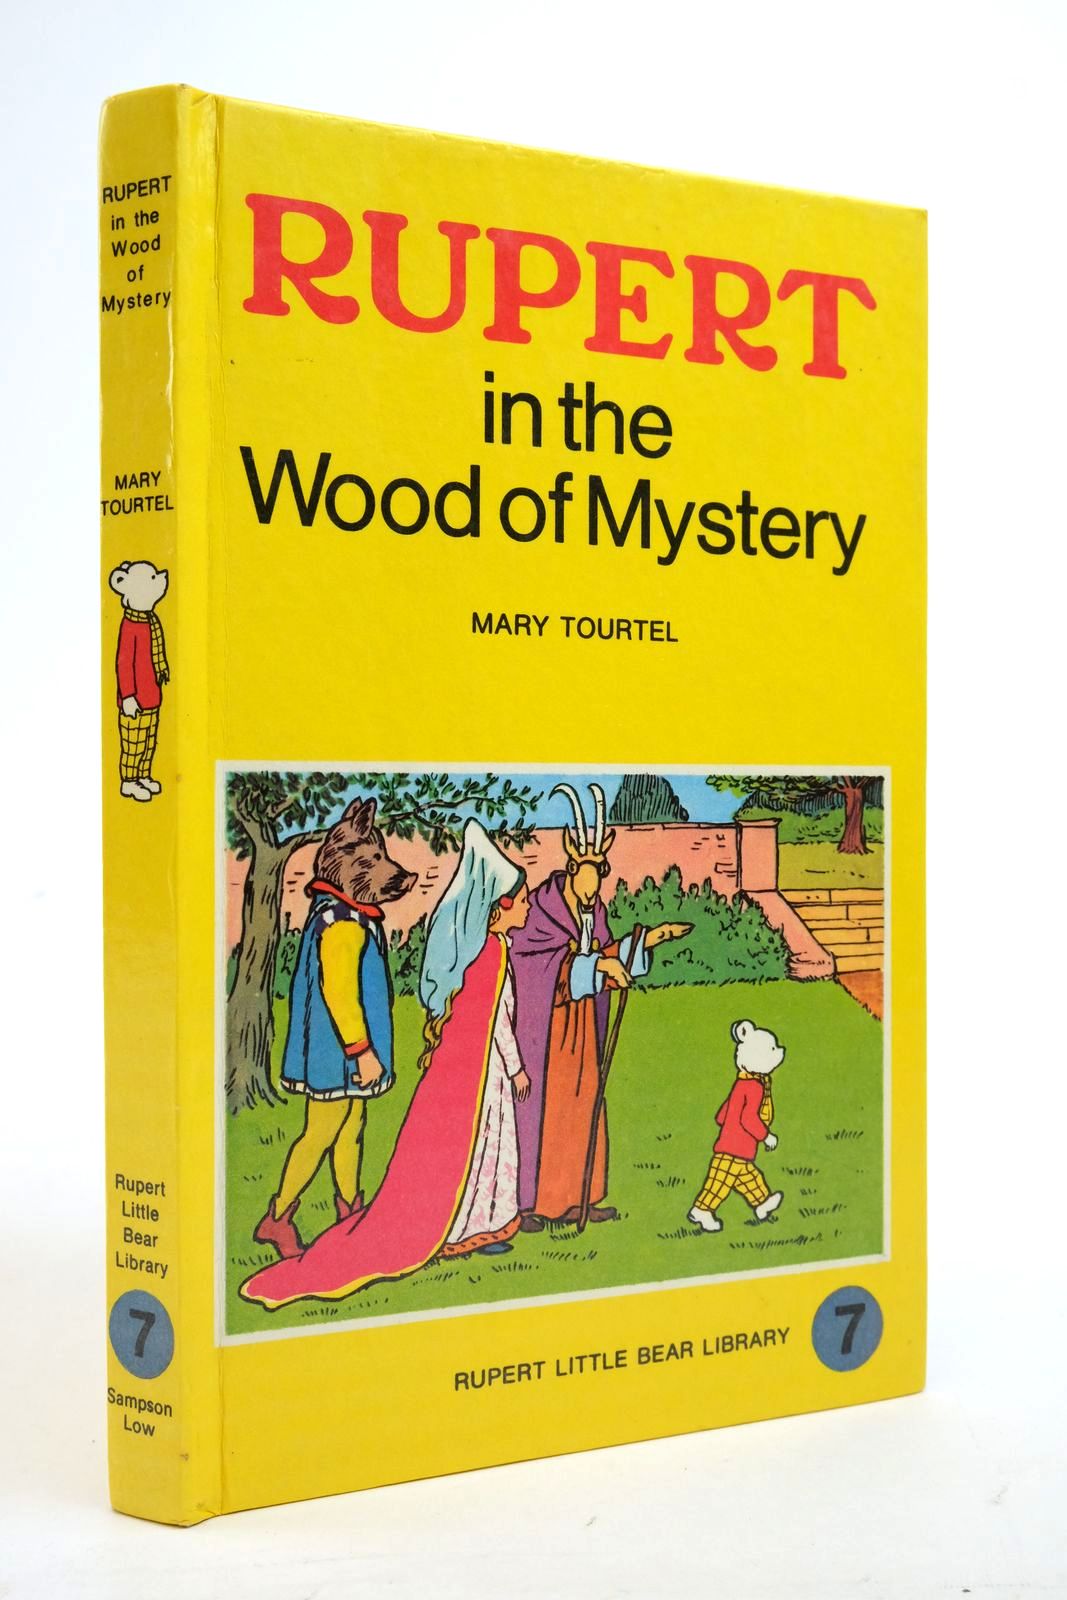 Photo of RUPERT IN THE WOOD OF MYSTERY - RUPERT LITTLE BEAR LIBRARY No. 7 (WOOLWORTH) written by Tourtel, Mary illustrated by Tourtel, Mary published by Sampson Low, Marston & Co. Ltd. (STOCK CODE: 2136967)  for sale by Stella & Rose's Books